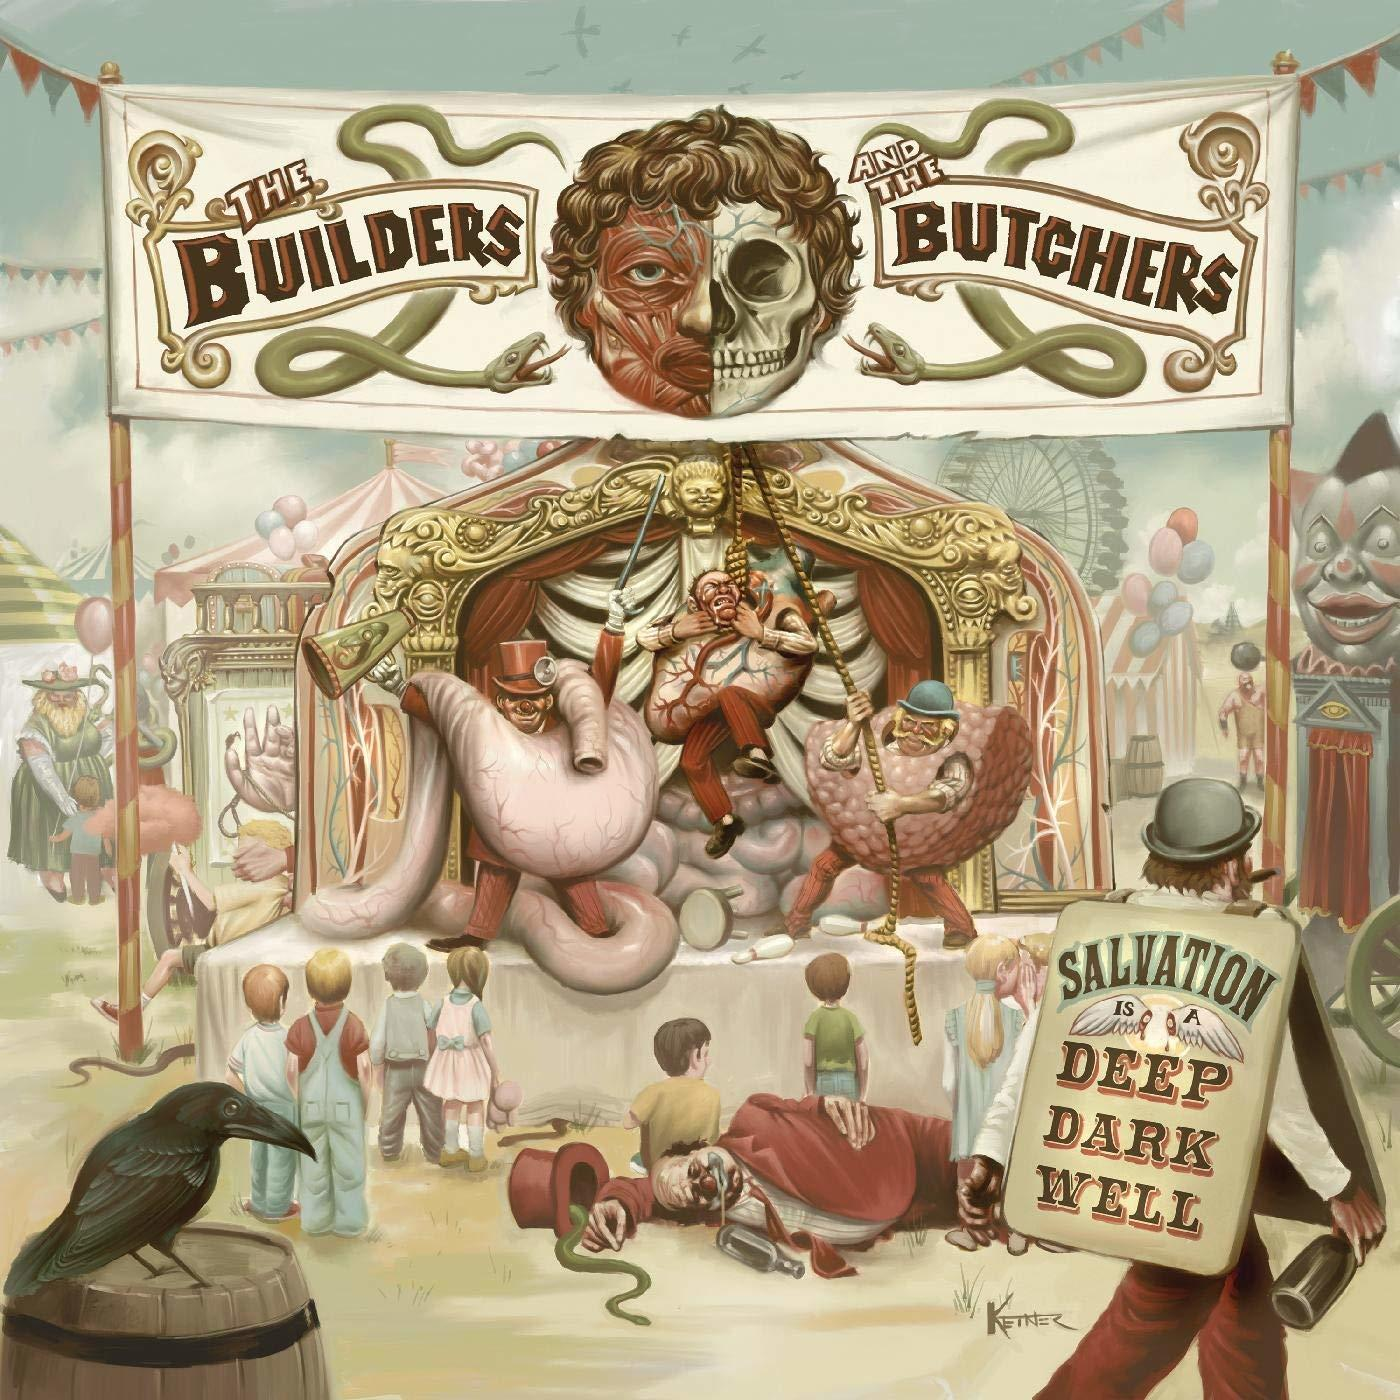 The Builders A - - DEEP (Vinyl) IS DARK Butchers WELL The And SALVATION